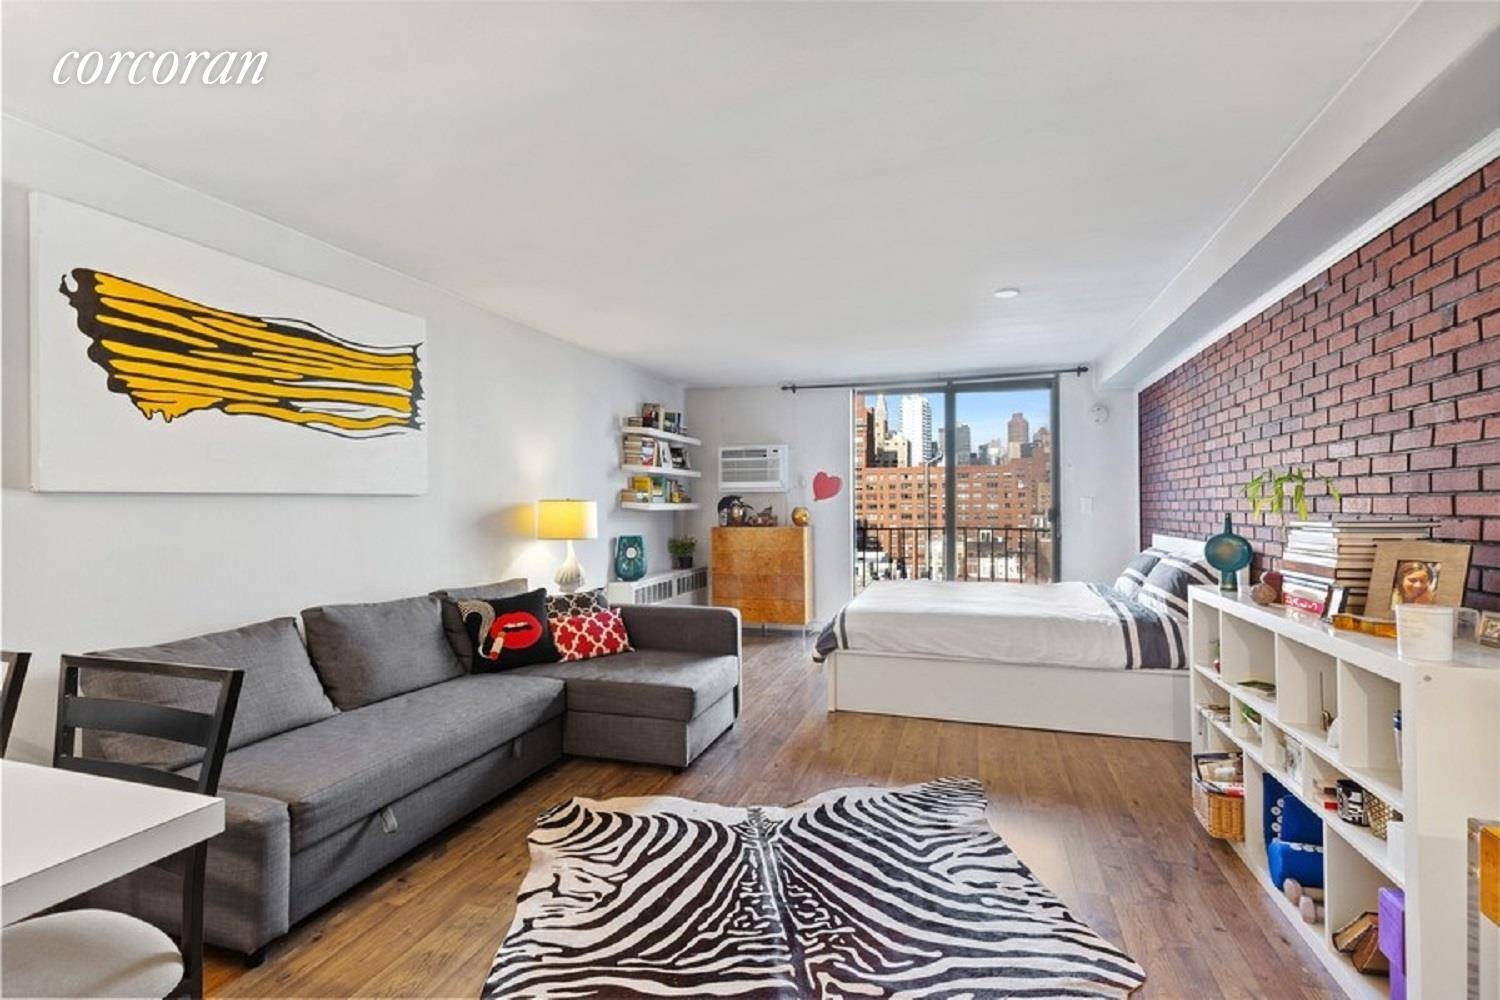 A rare find. Welcome to unit 723, a high floor studio at the Penny Lane with a Juliet balcony providing unobstructed views of the Chrysler building.